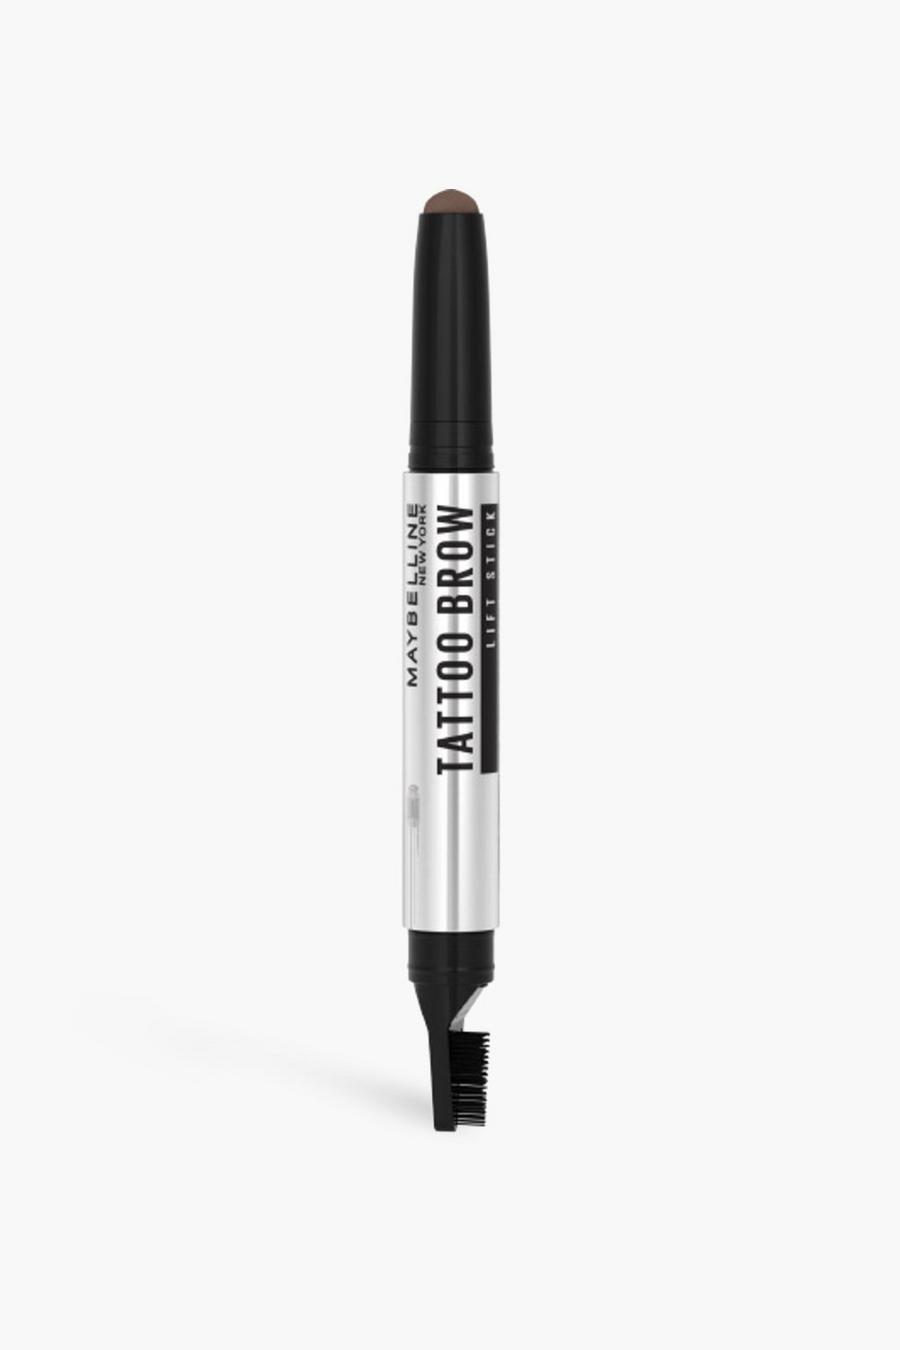 Maybelline - Stick à double embout pour sourcils Tattoo Brow Lift, Deep brown